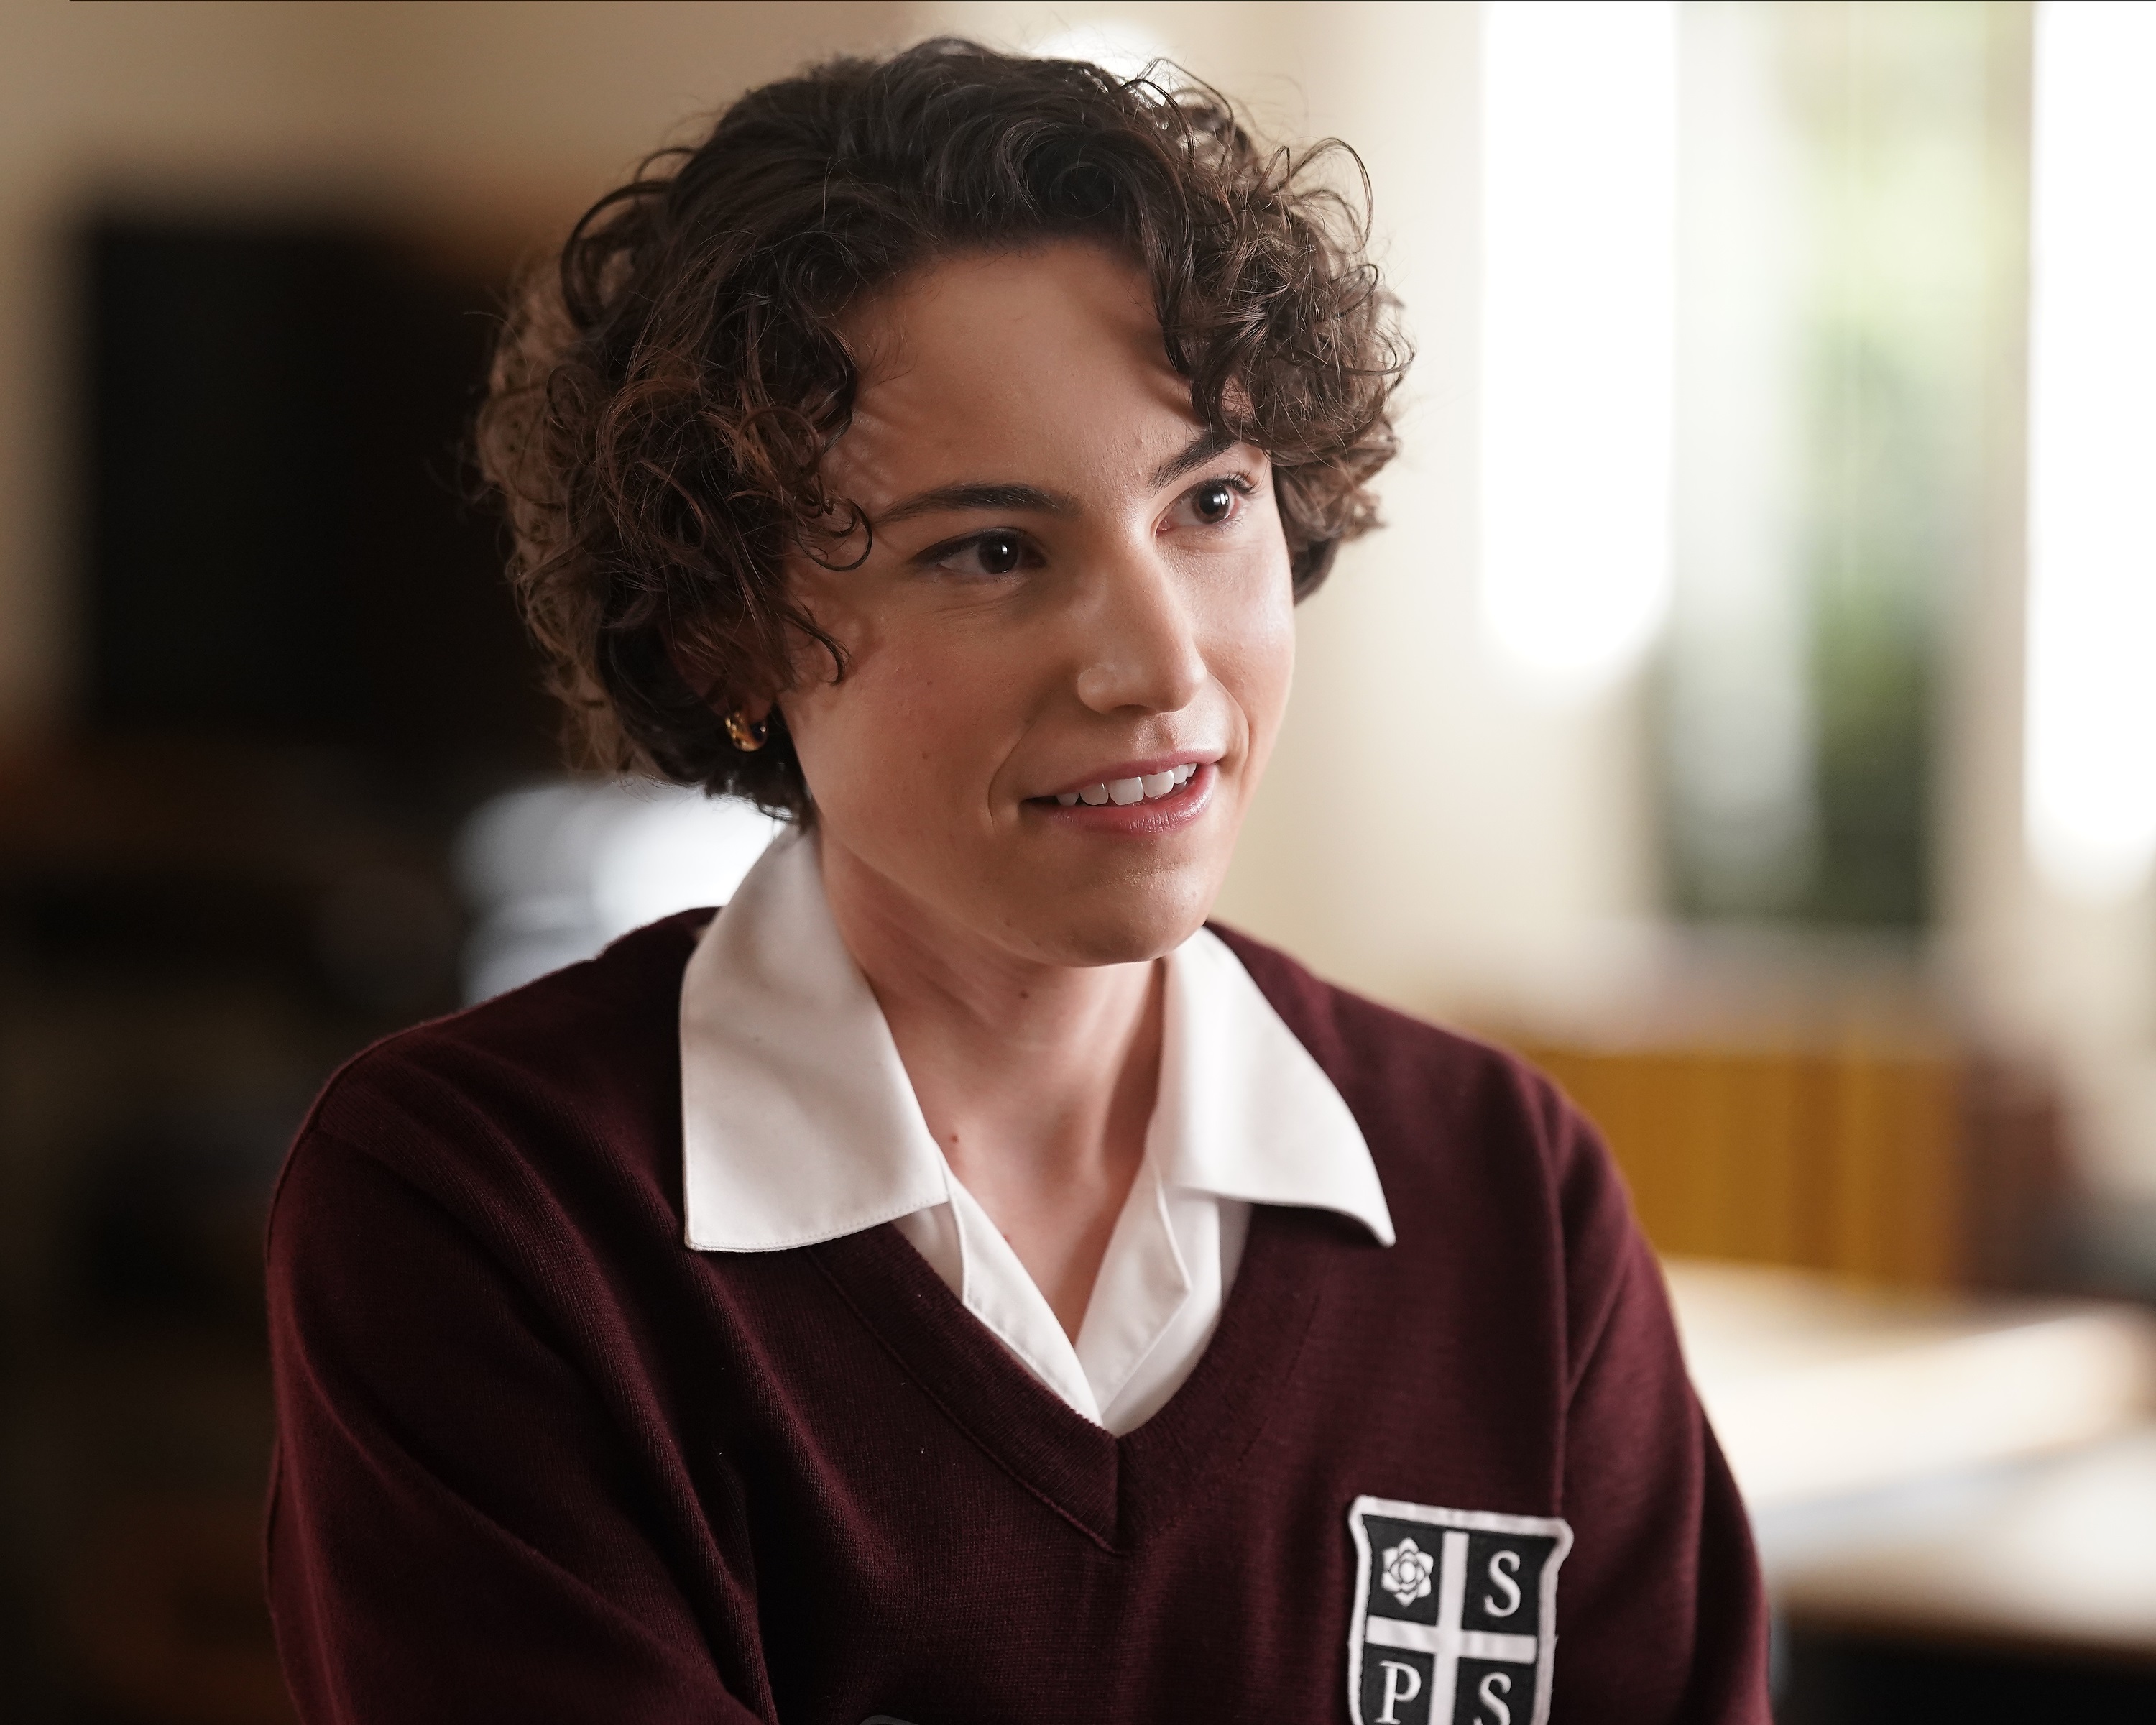 'A Million Little Things' guest star Ash Spencer as Madison/Maddox smiling in her Sussex Prep uniform